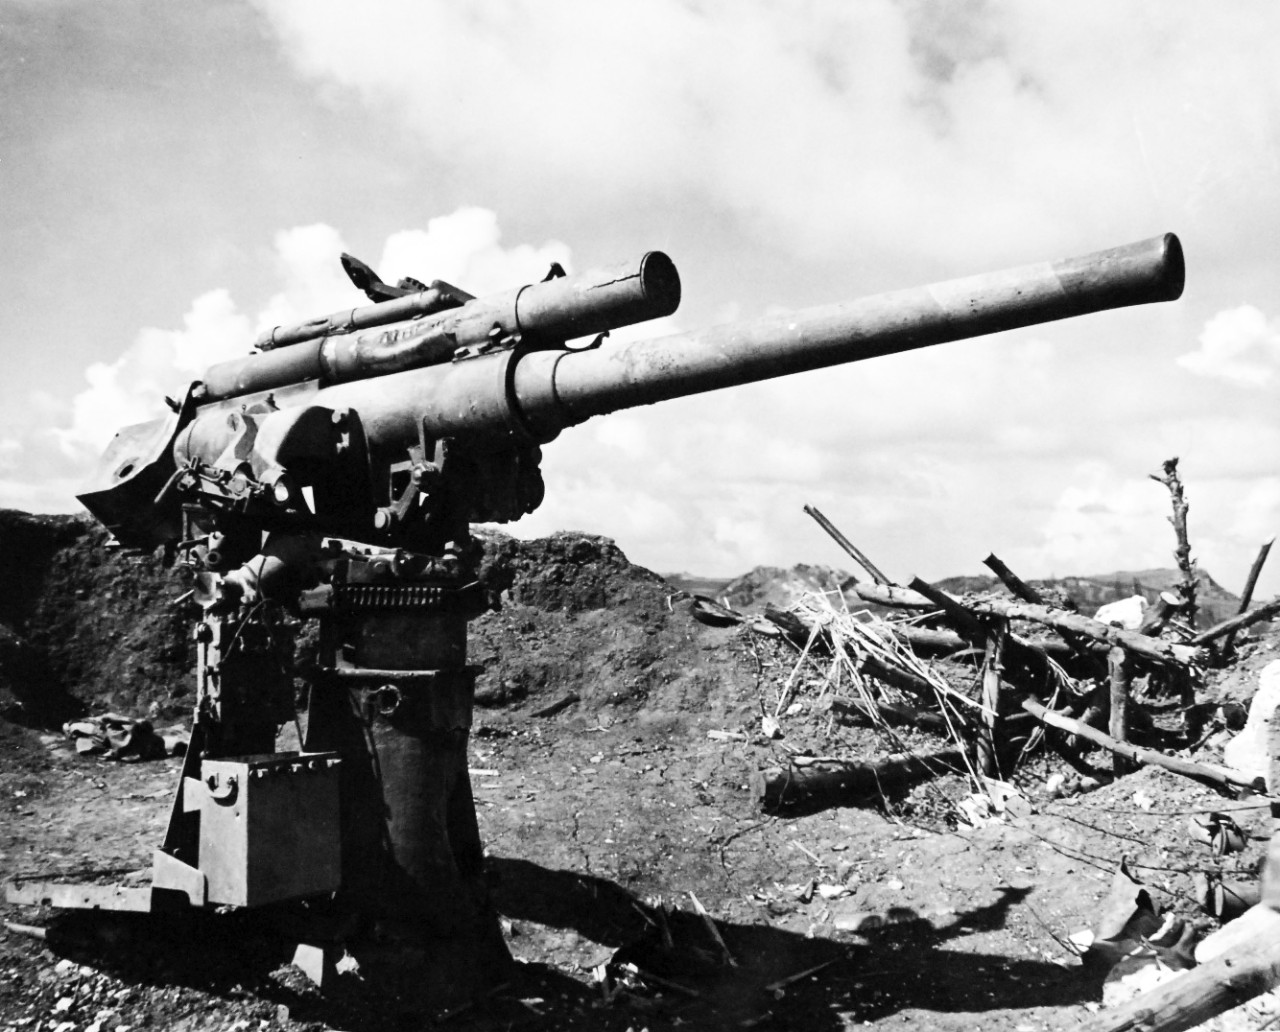 80-G-307772:  Invasion of Saipan, June-July 1944.  Japanese guns captured on Saipan after invasion.  Shown: 4.7 guns.  Photograph received March 20, 1945.      Official U.S. Navy Photograph, now in the collections of the U.S. Navy.  (2017/04/11).  